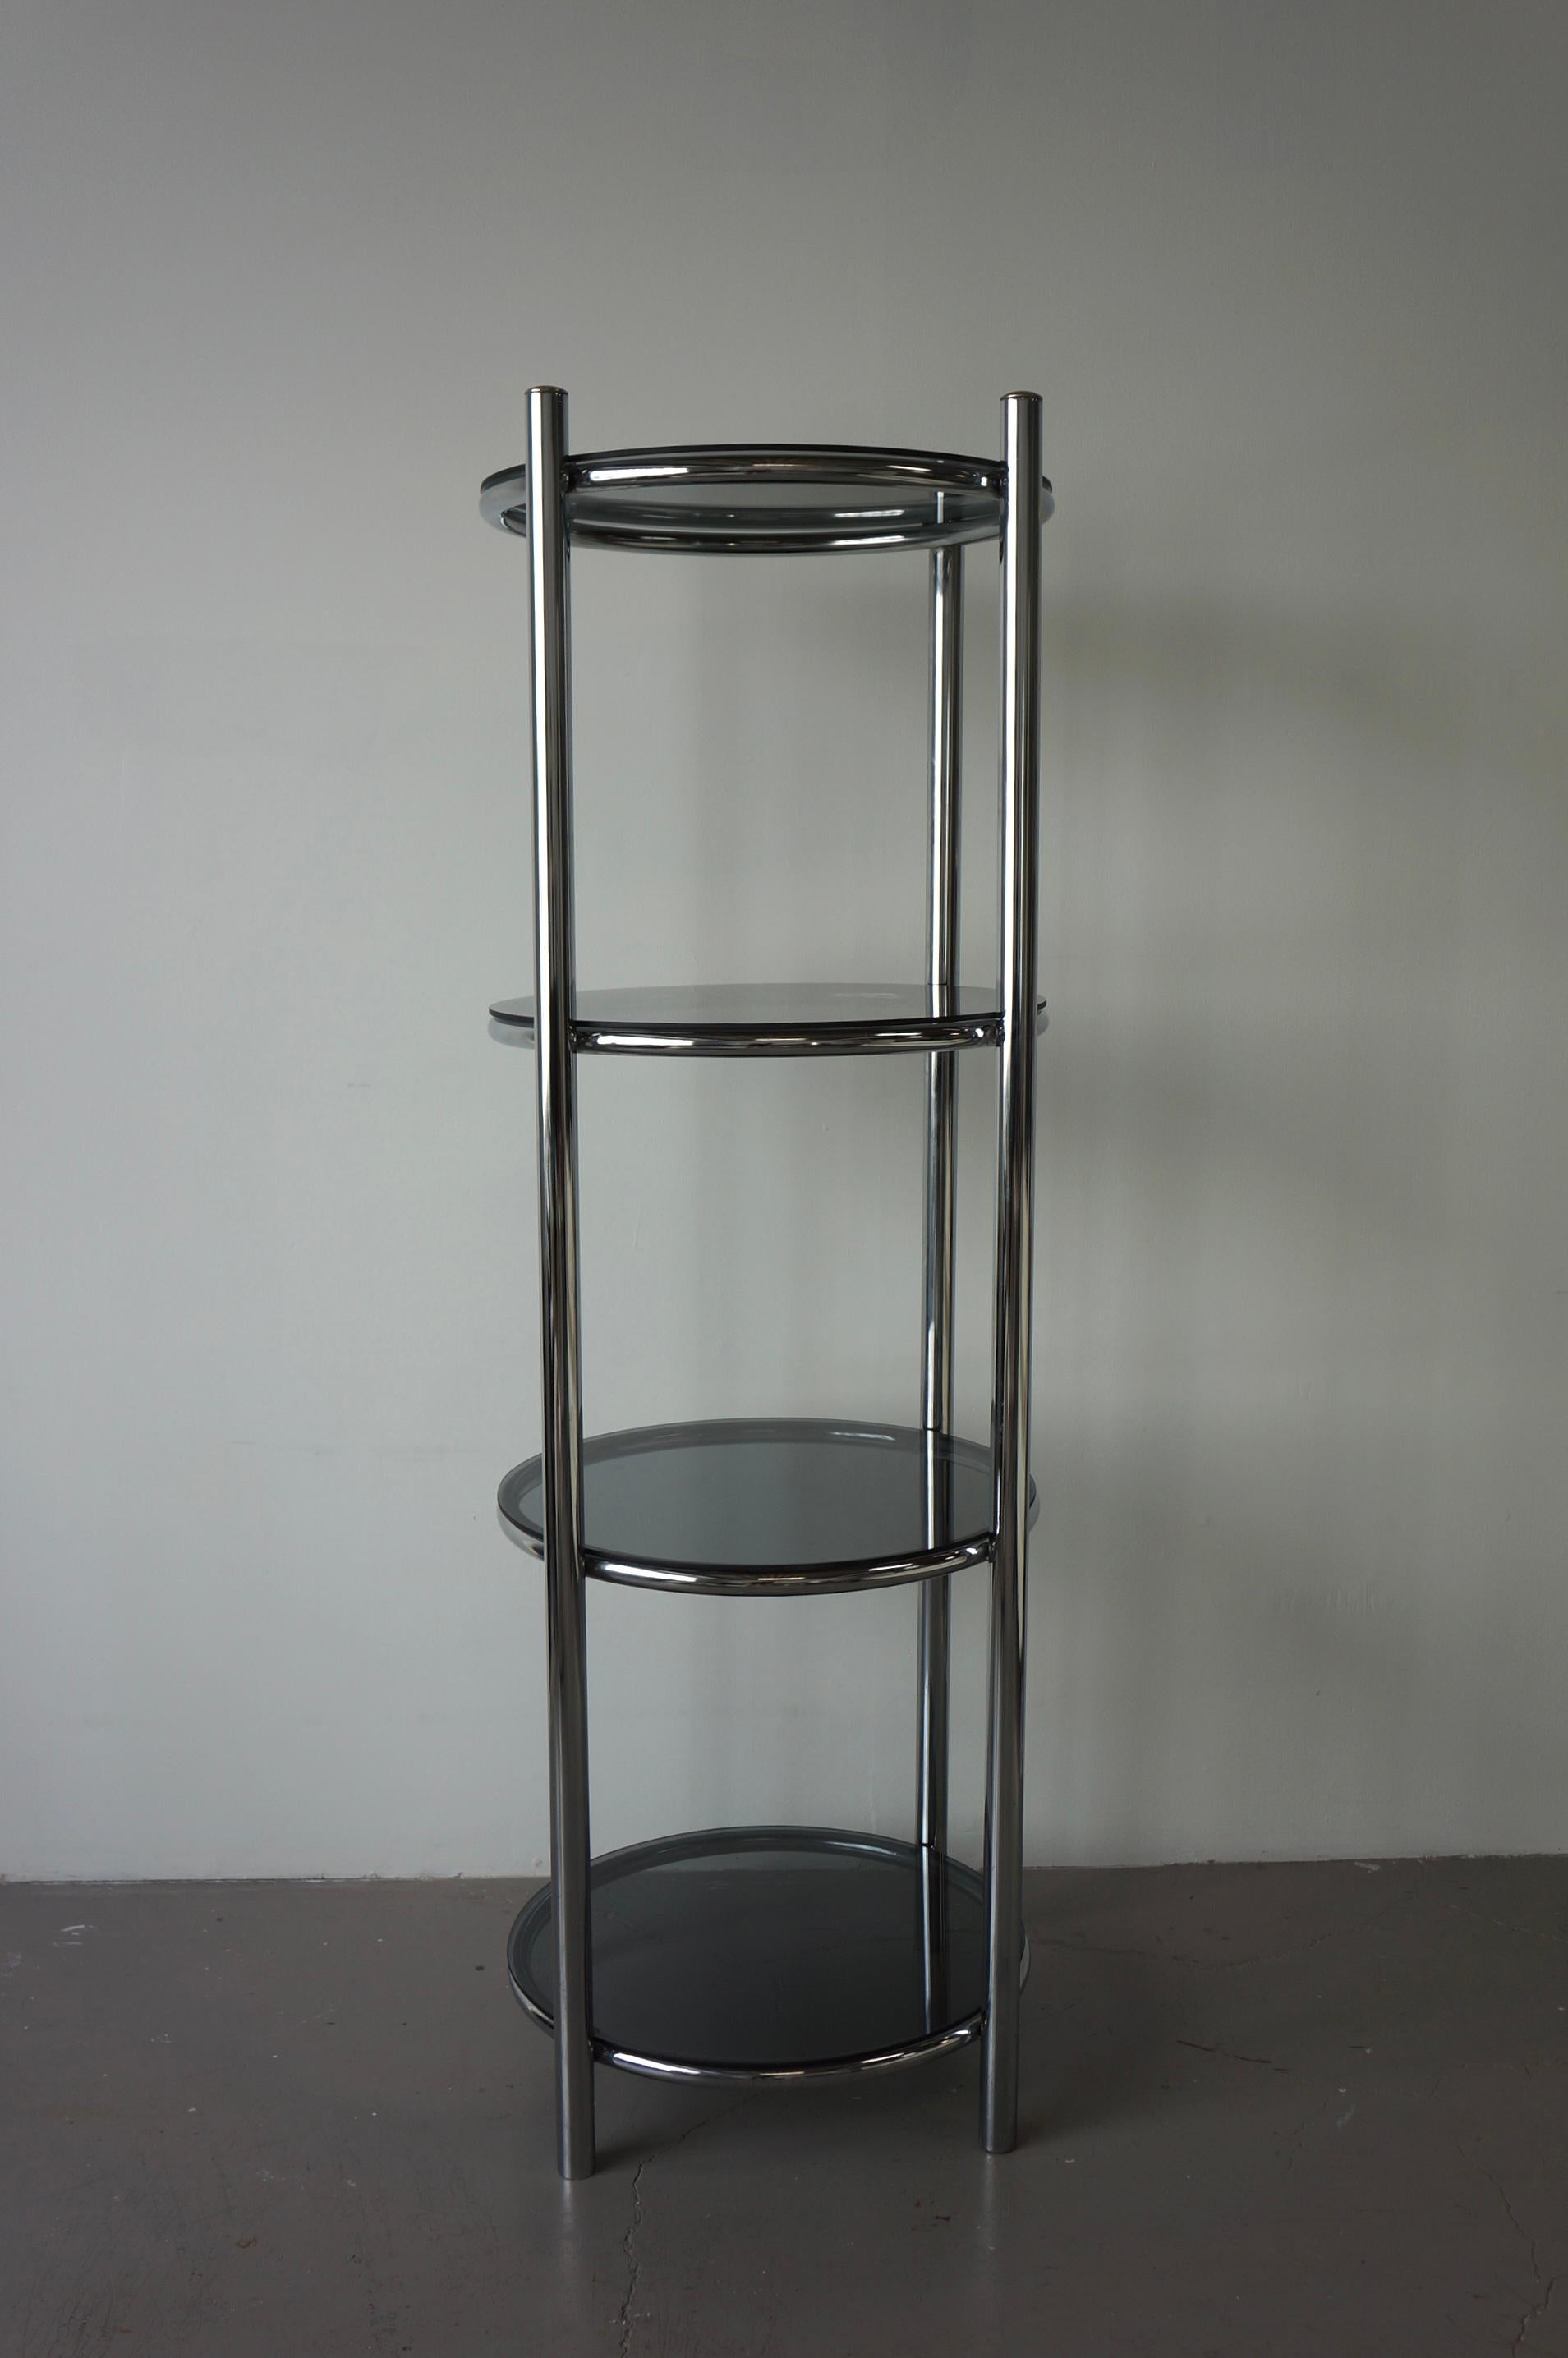 Circular chrome shelf with smoked glass shelving. This piece is a classic reminiscent of mid century modern design. It was made in the late 1960s. The chrome shelf is tubular with thick rounded frame featuring smoked glass shelving. The four legs of